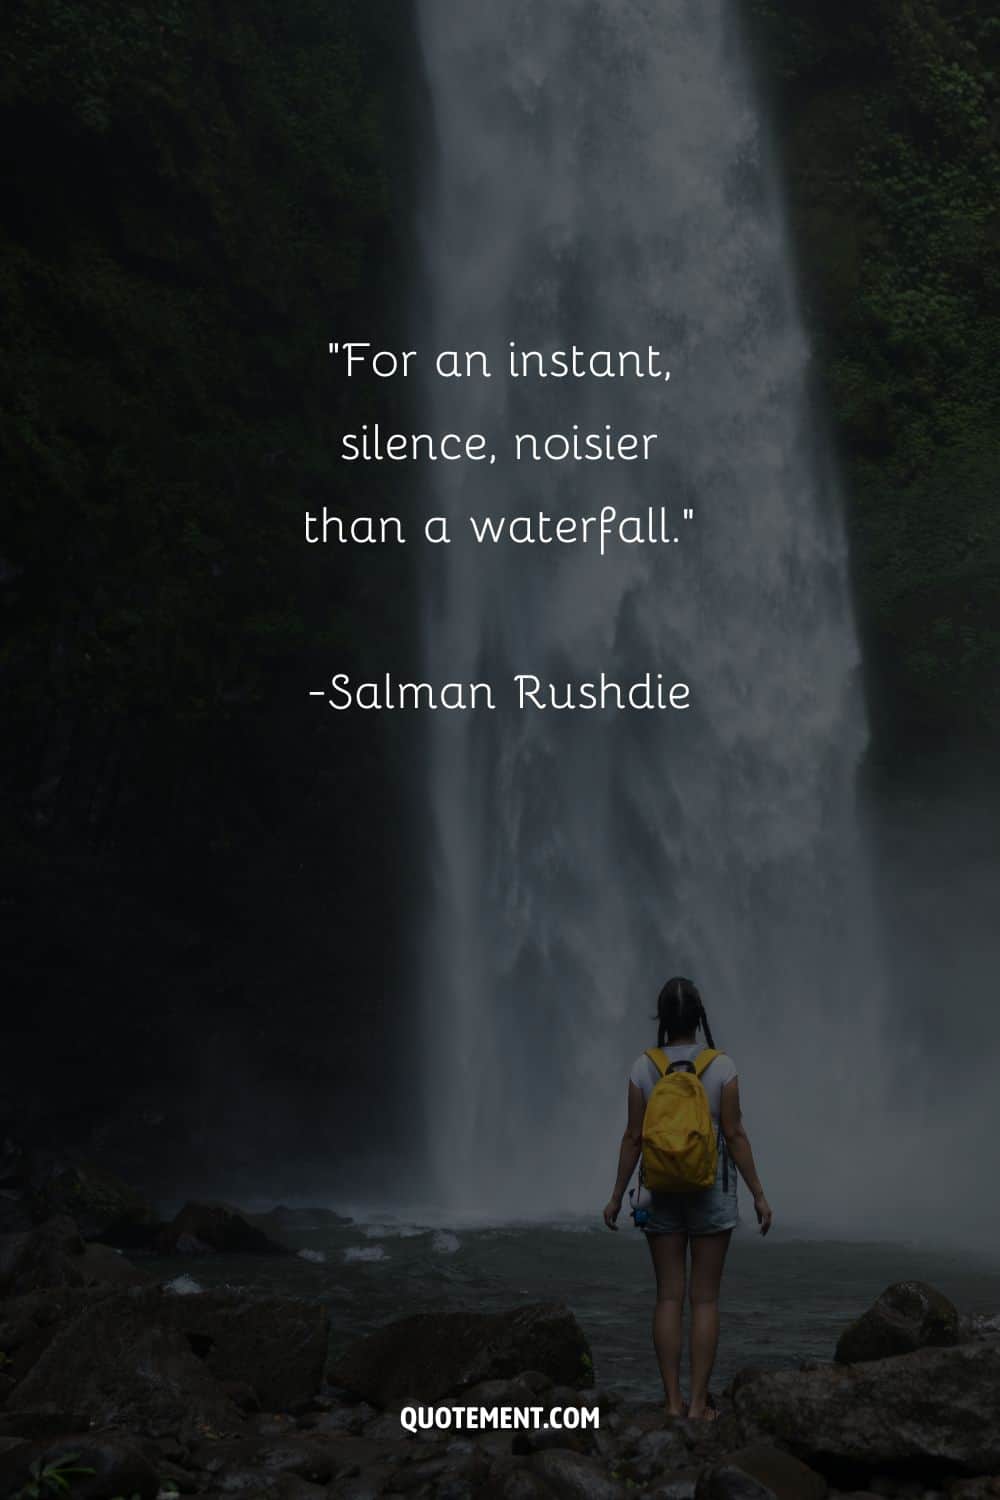 Amazing quote by Salman Rushdie and a woman by the waterfall in the background
